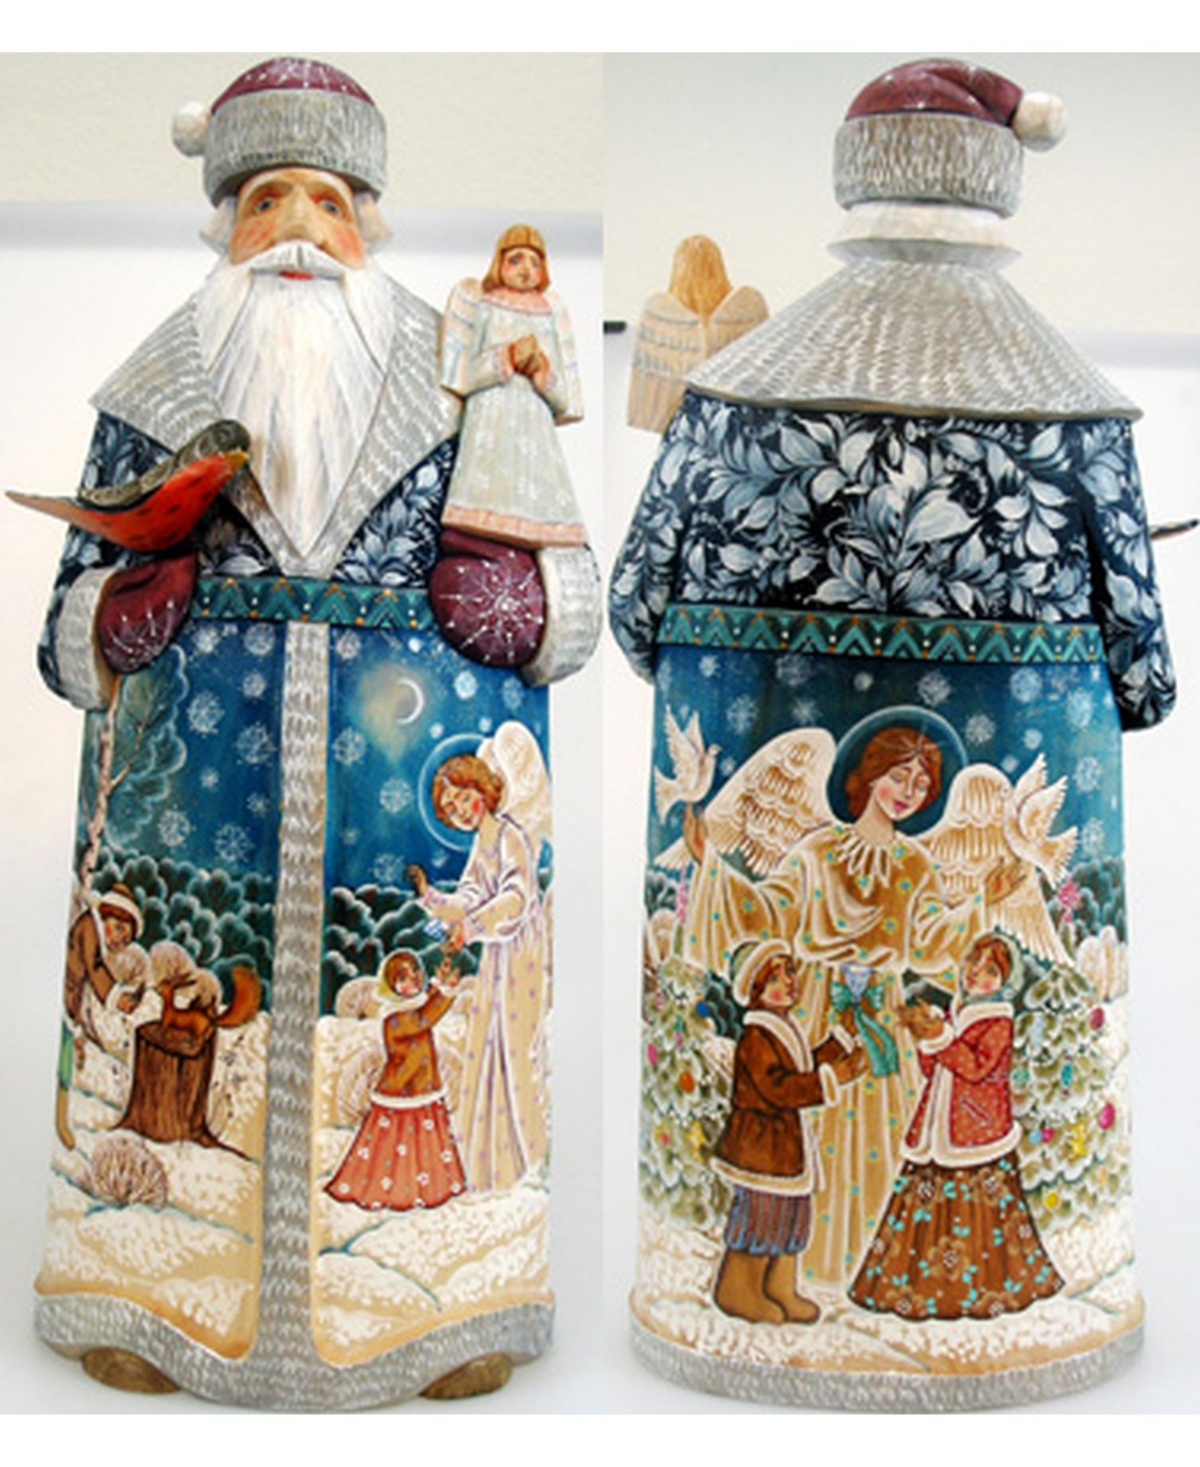 Woodcarved and Hand Painted Angelic Guidance Santa Claus Figurine - Multi